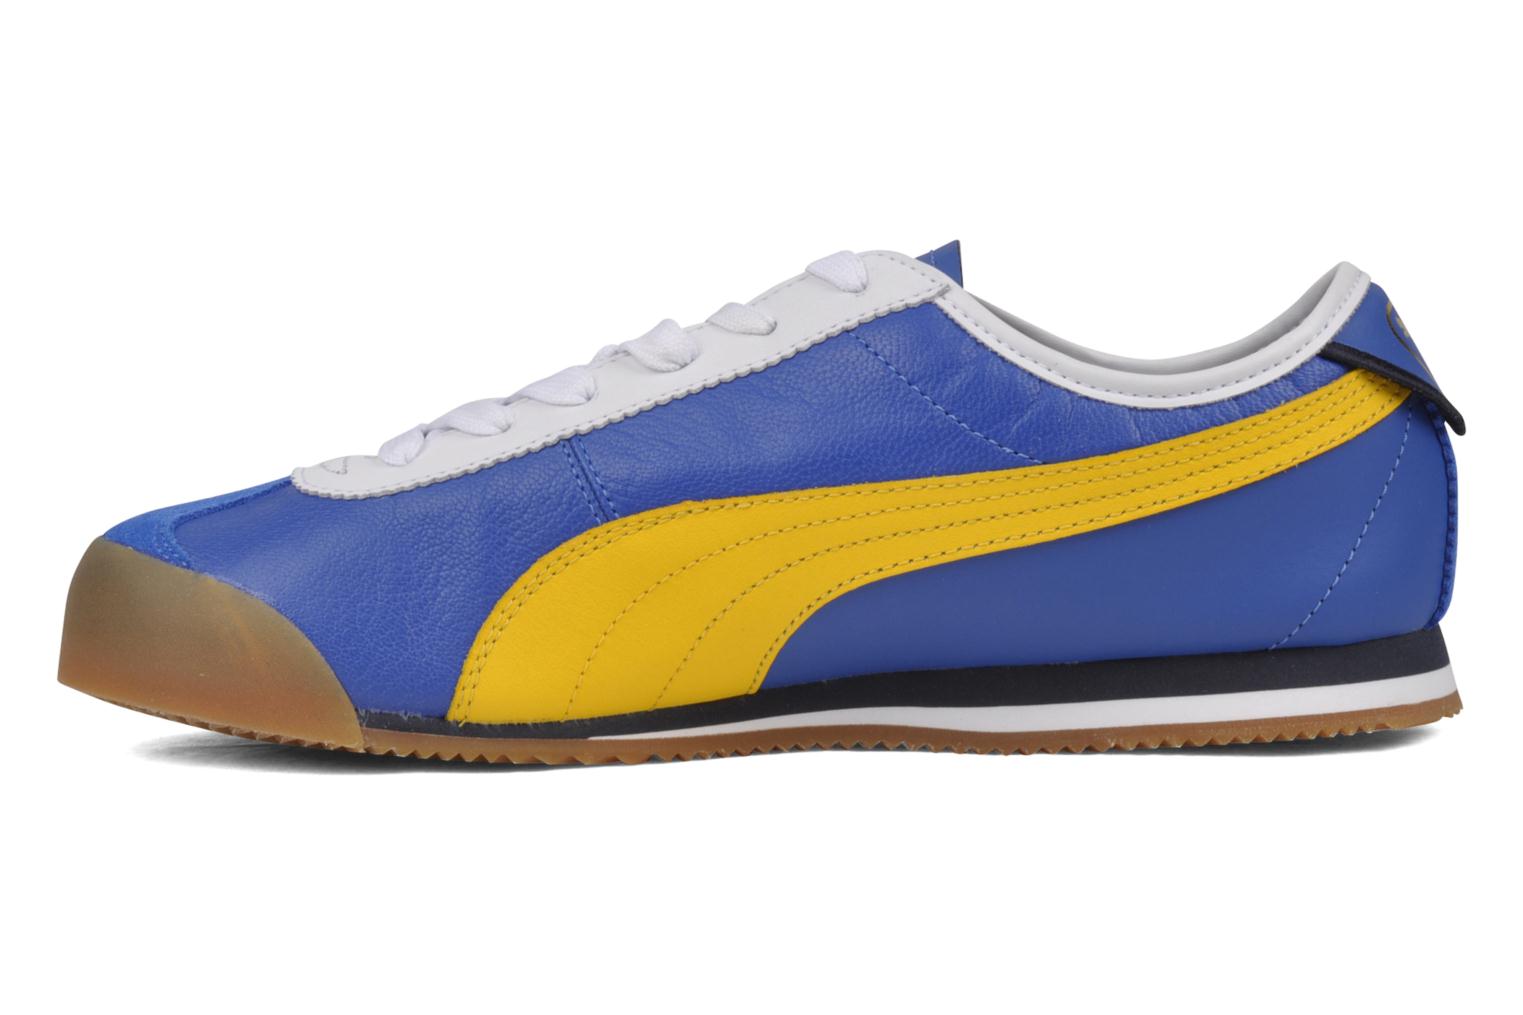 Puma Roma 68 Vintage Trainers in Blue at Sarenza.co.uk (34812)